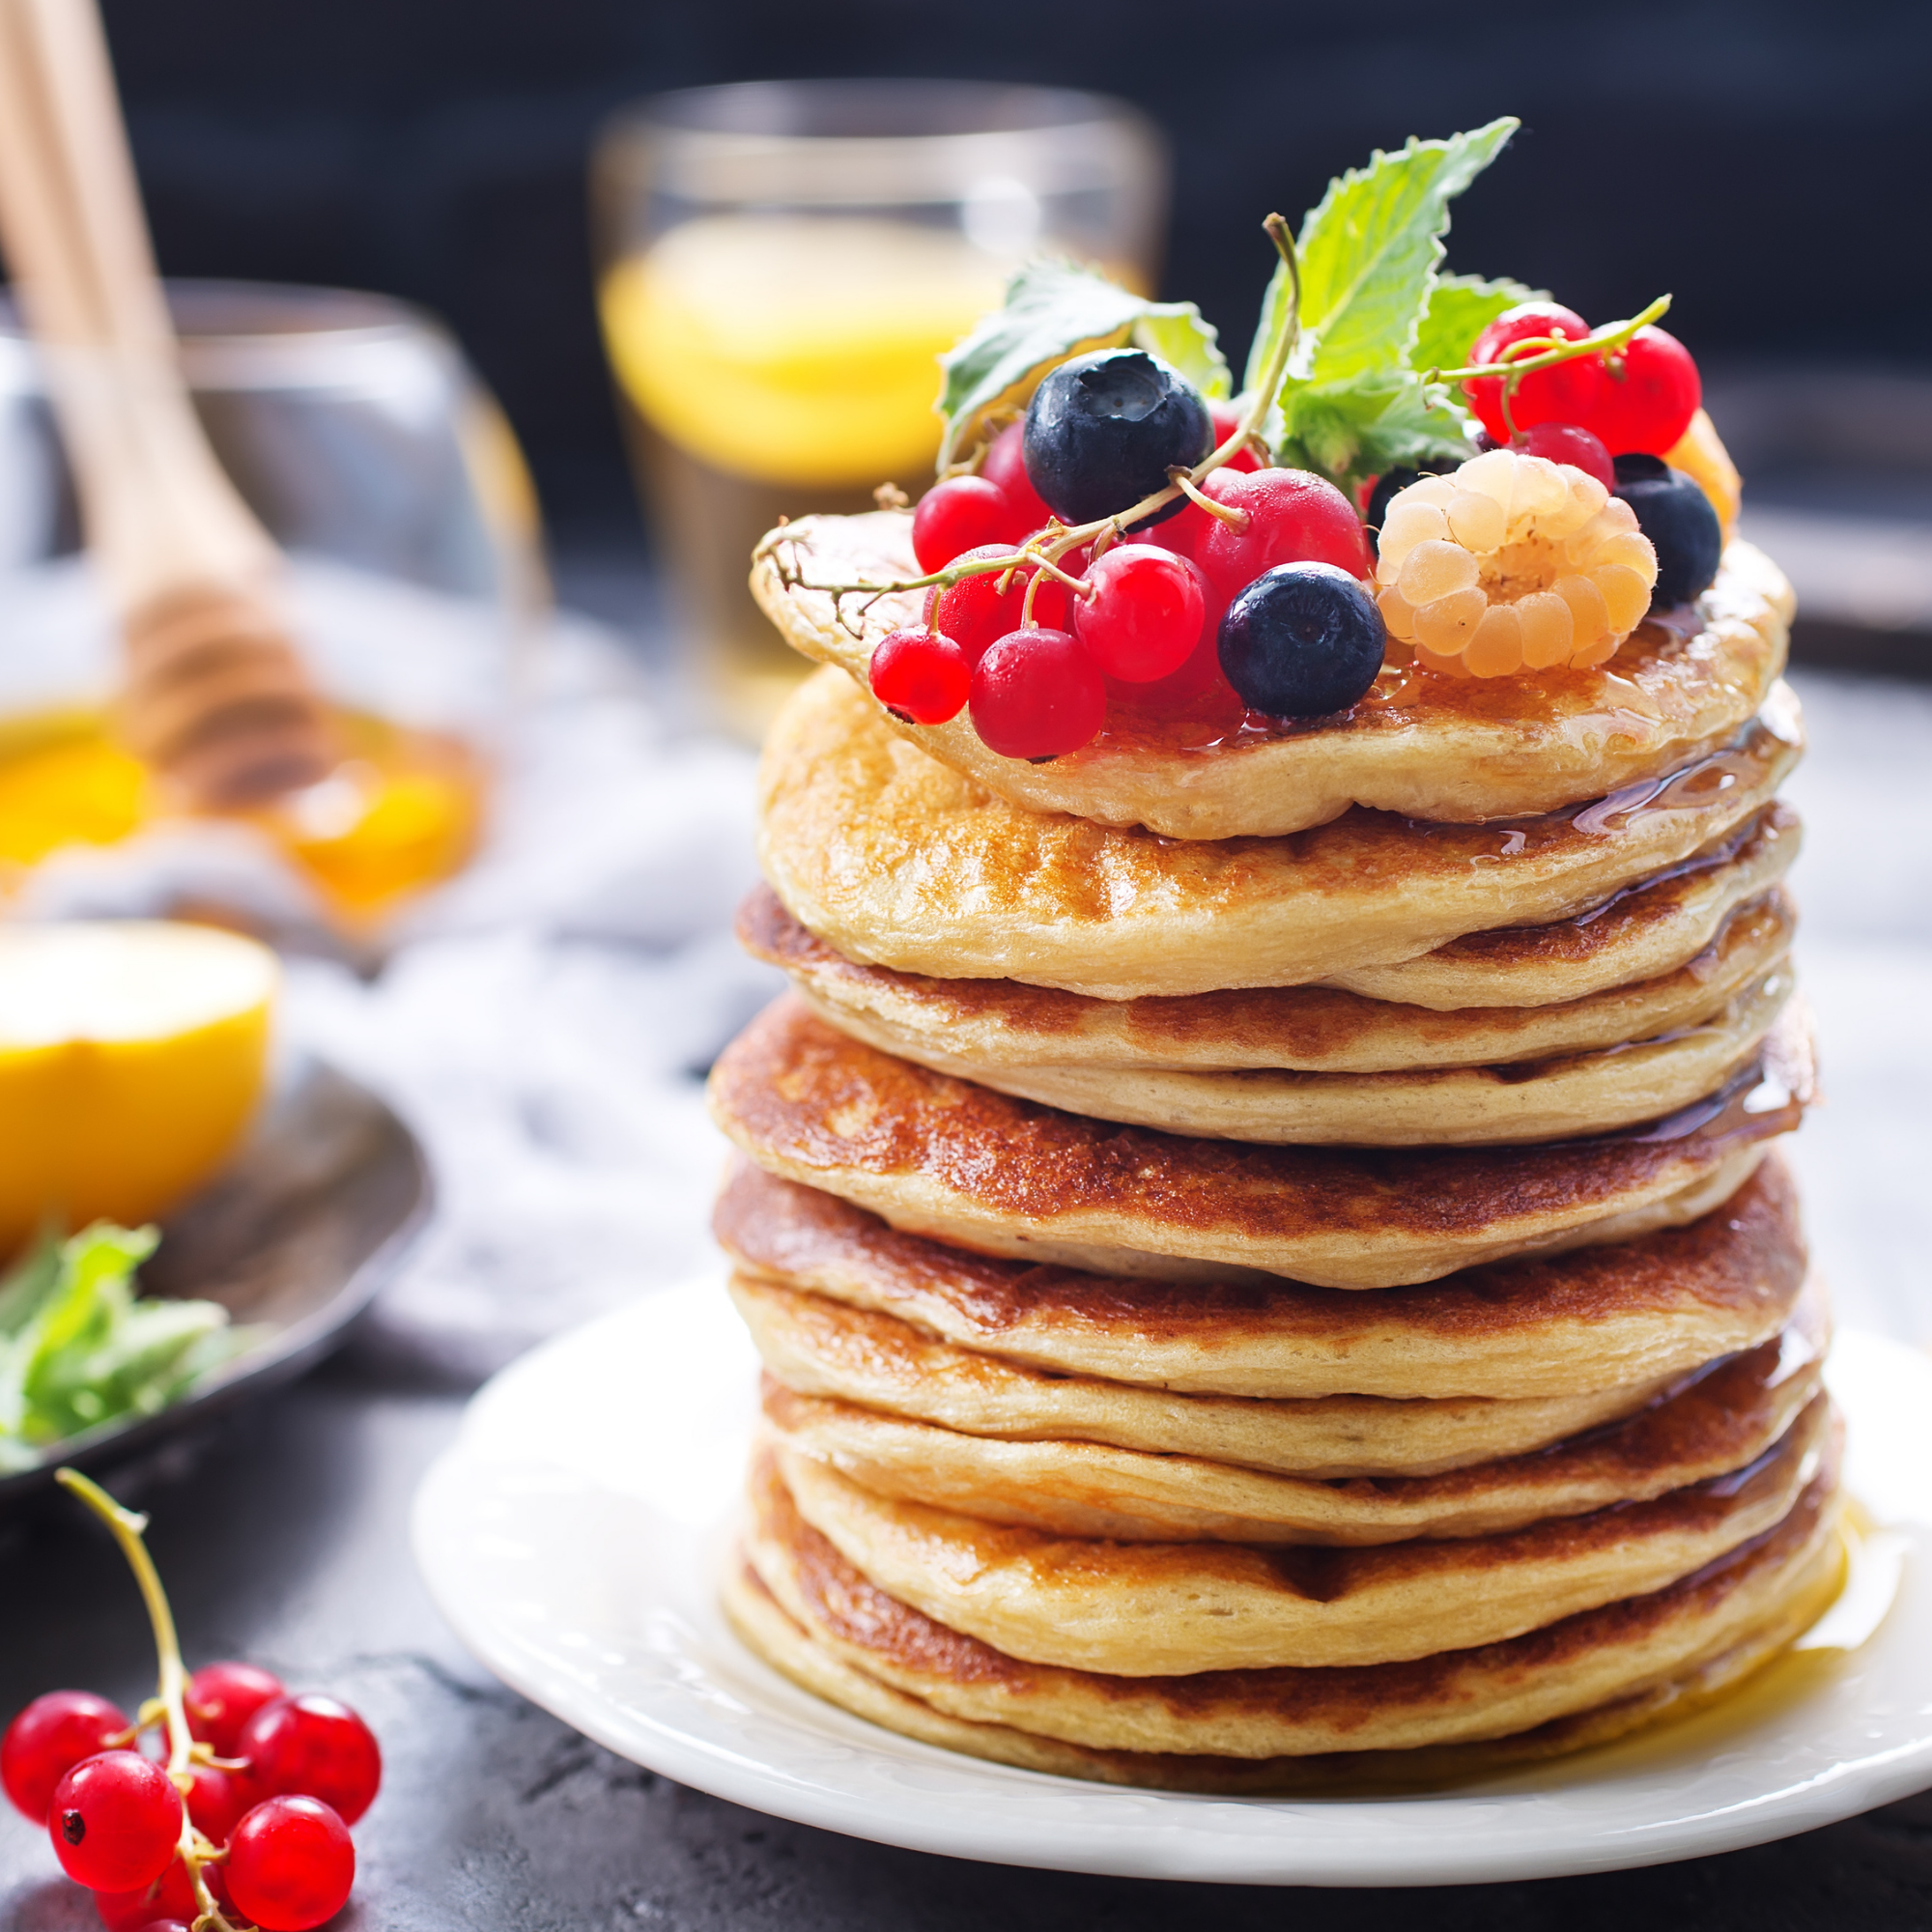 MonkVee is making breakfast fluffy again!  Have you been craving those classic, delicious fluffy pancakes? This Fluffy Low Carb Protein Pancake recipe is a sure way to beat those cravings in the healthiest way possible. We cut down on the carbs by using M